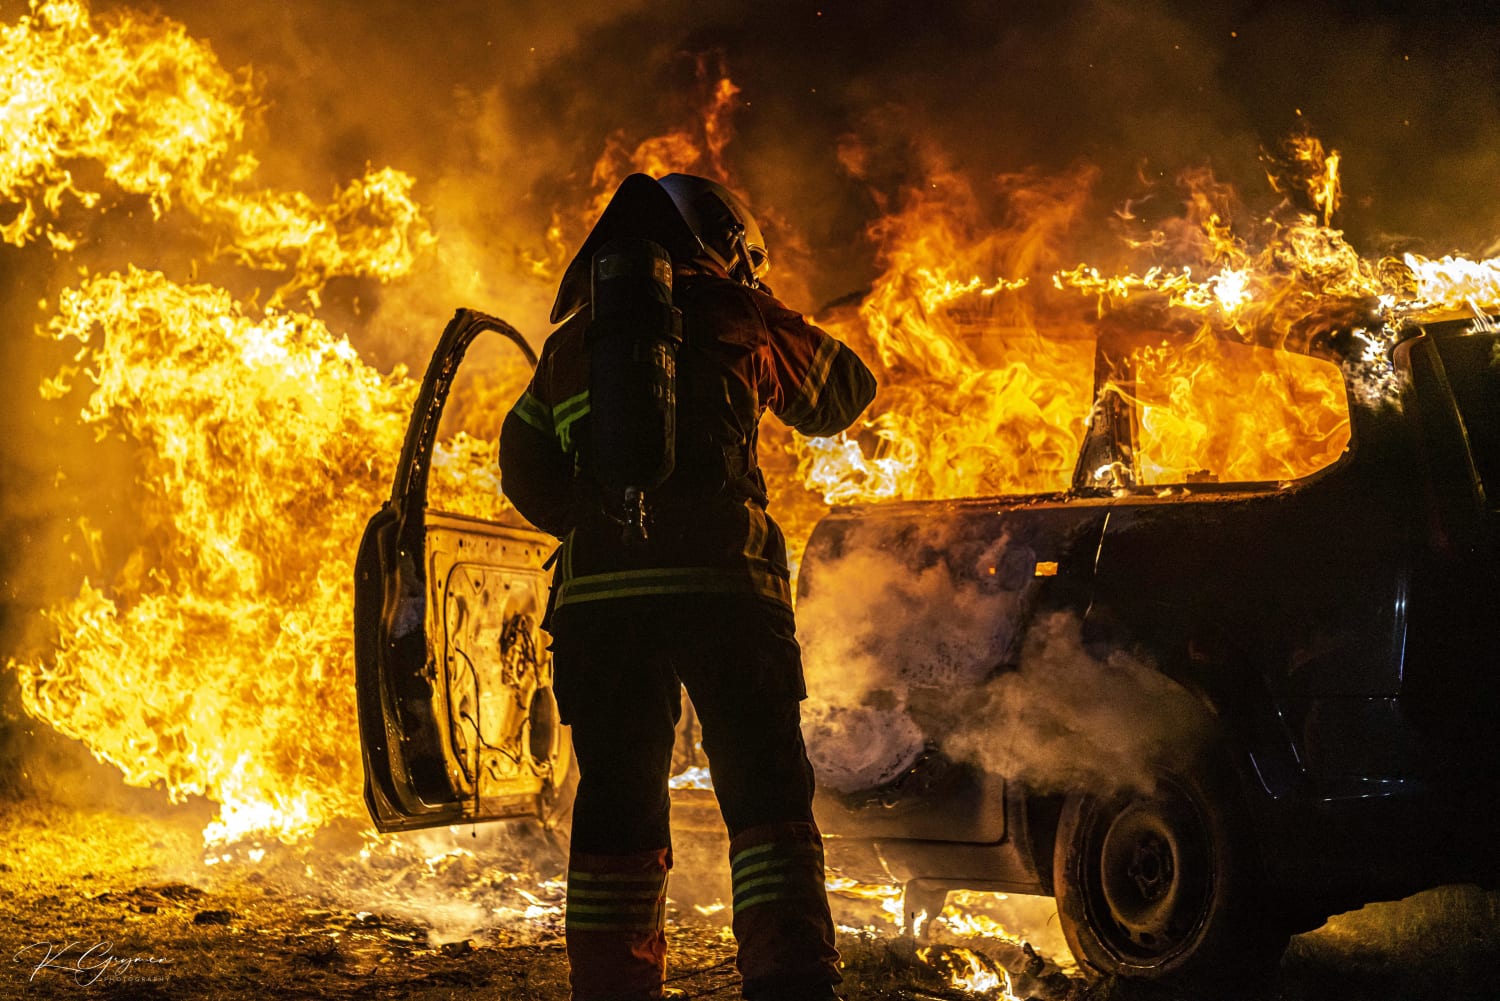 ITAP Car fire and firefighter